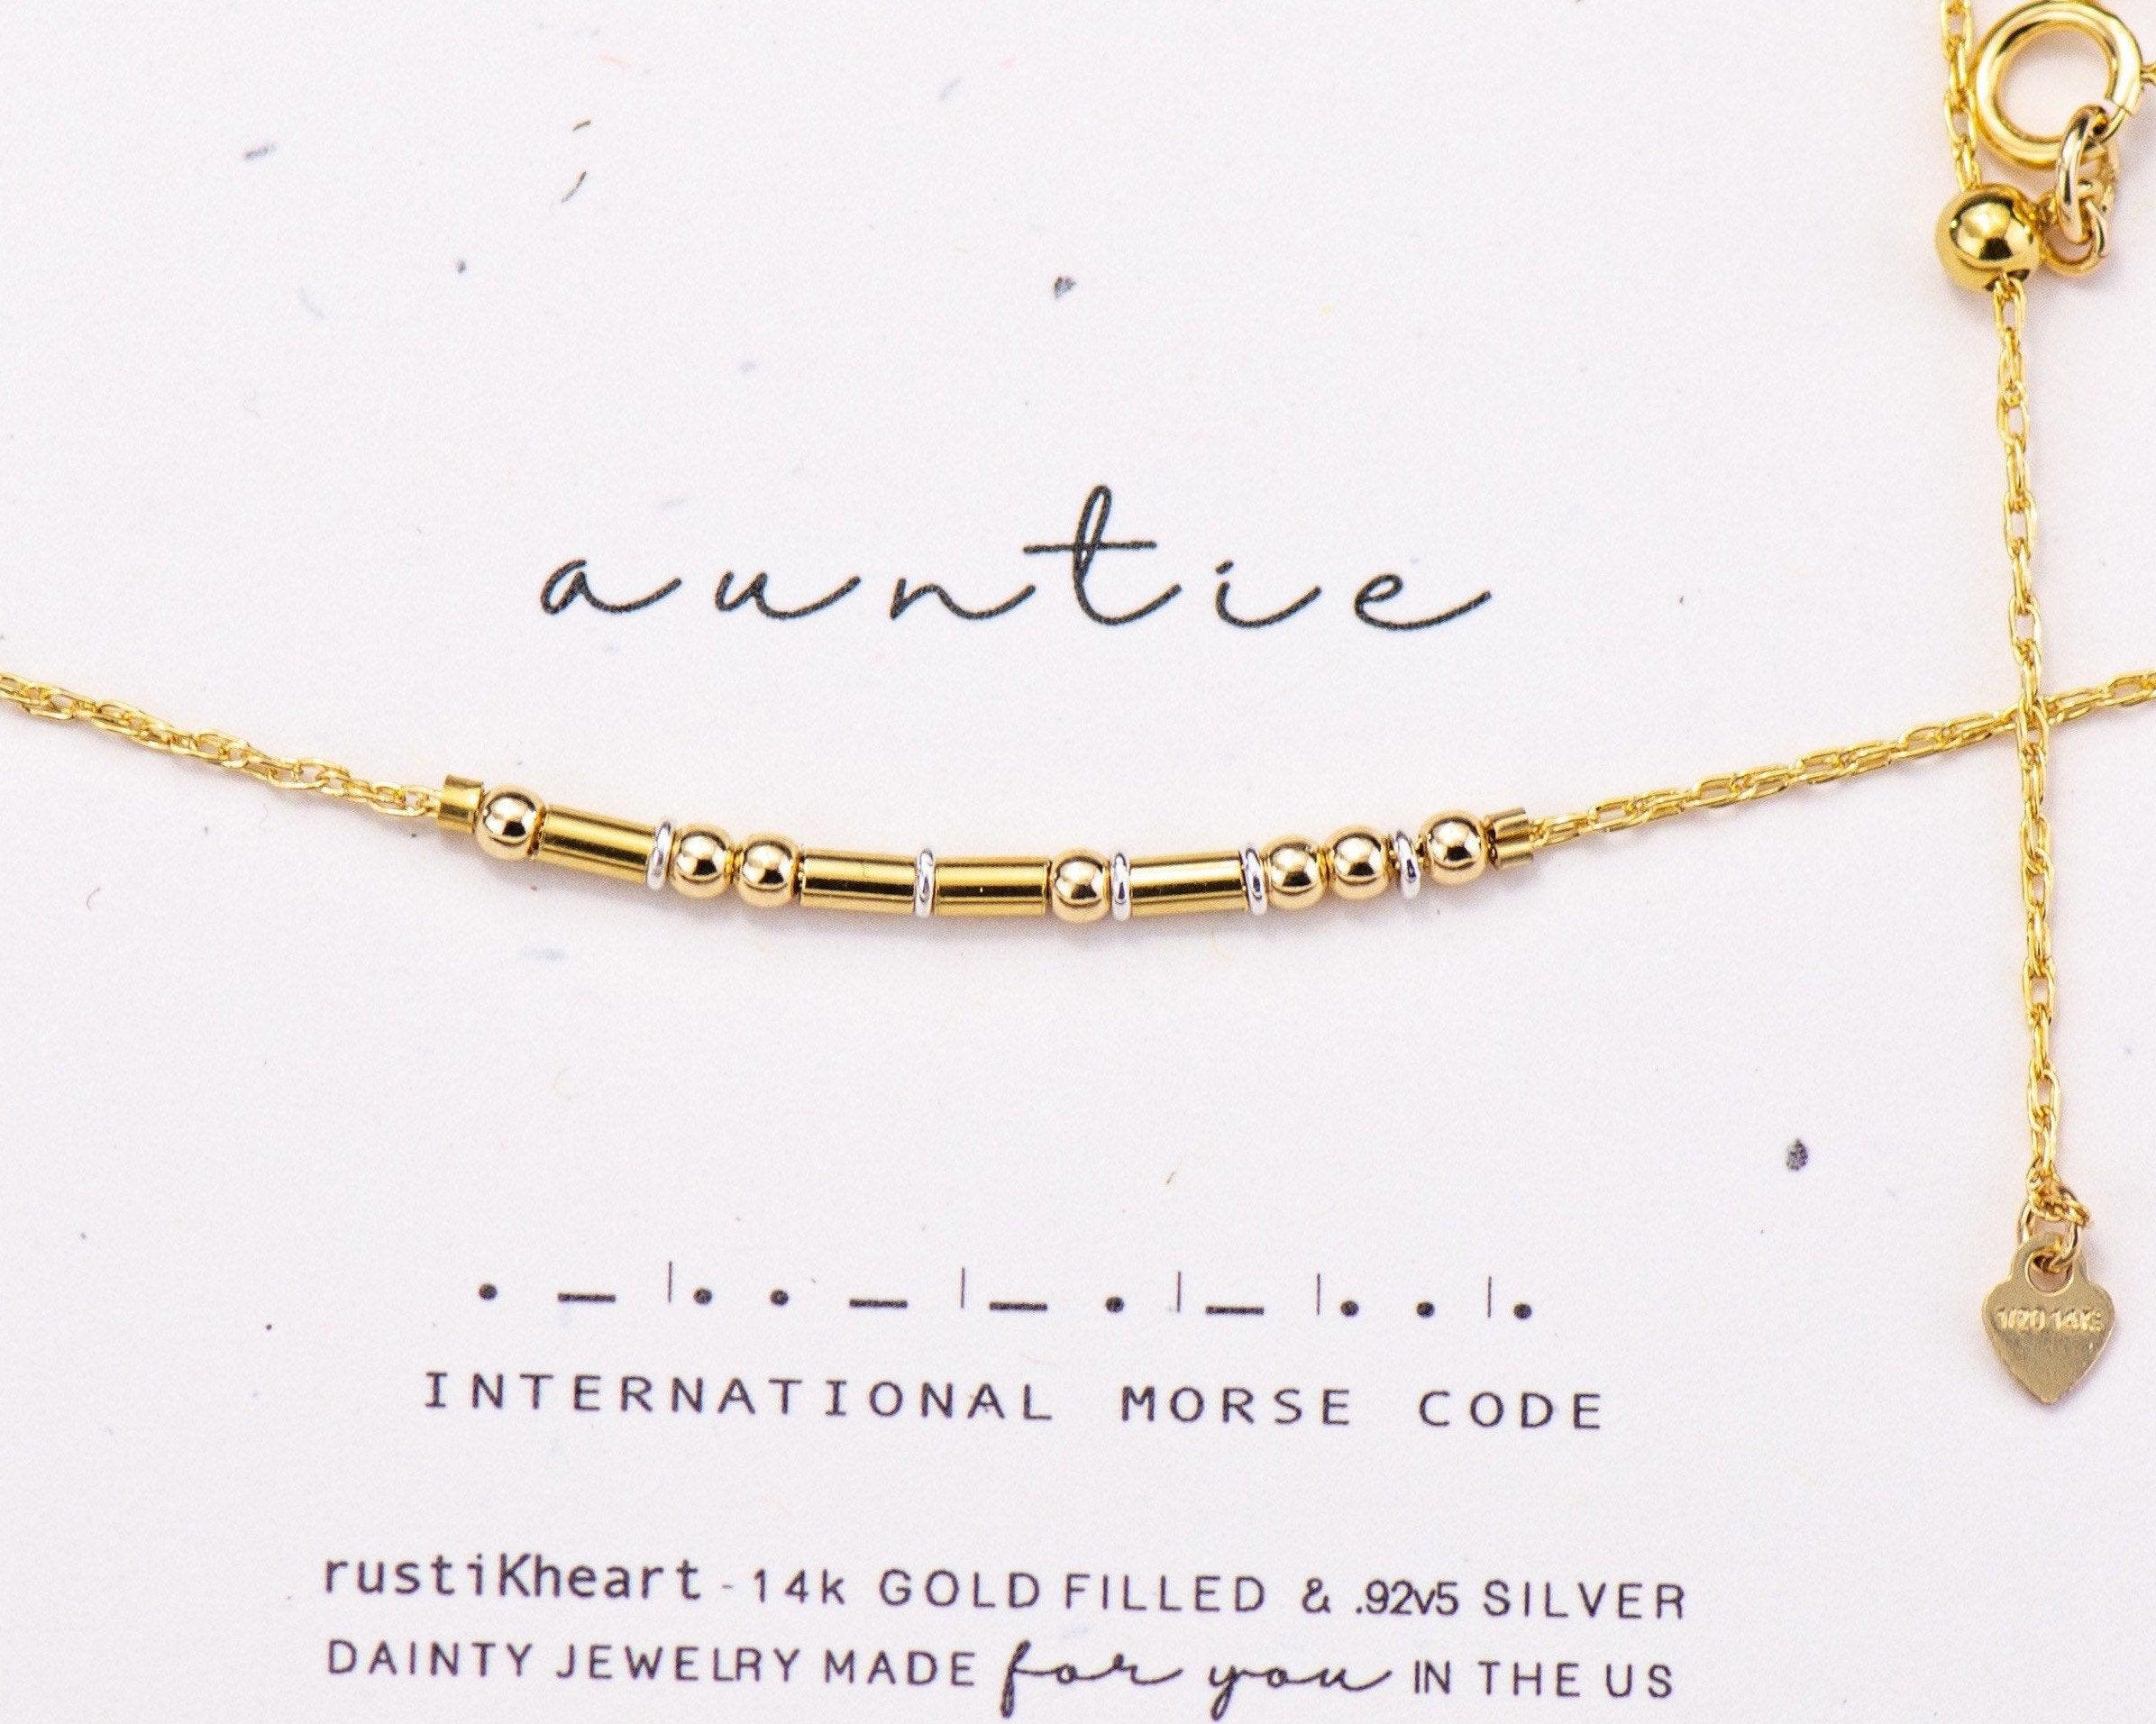 Auntie Morse Code Necklace • AX.YS.YT.S2.Y - Morse and Dainty